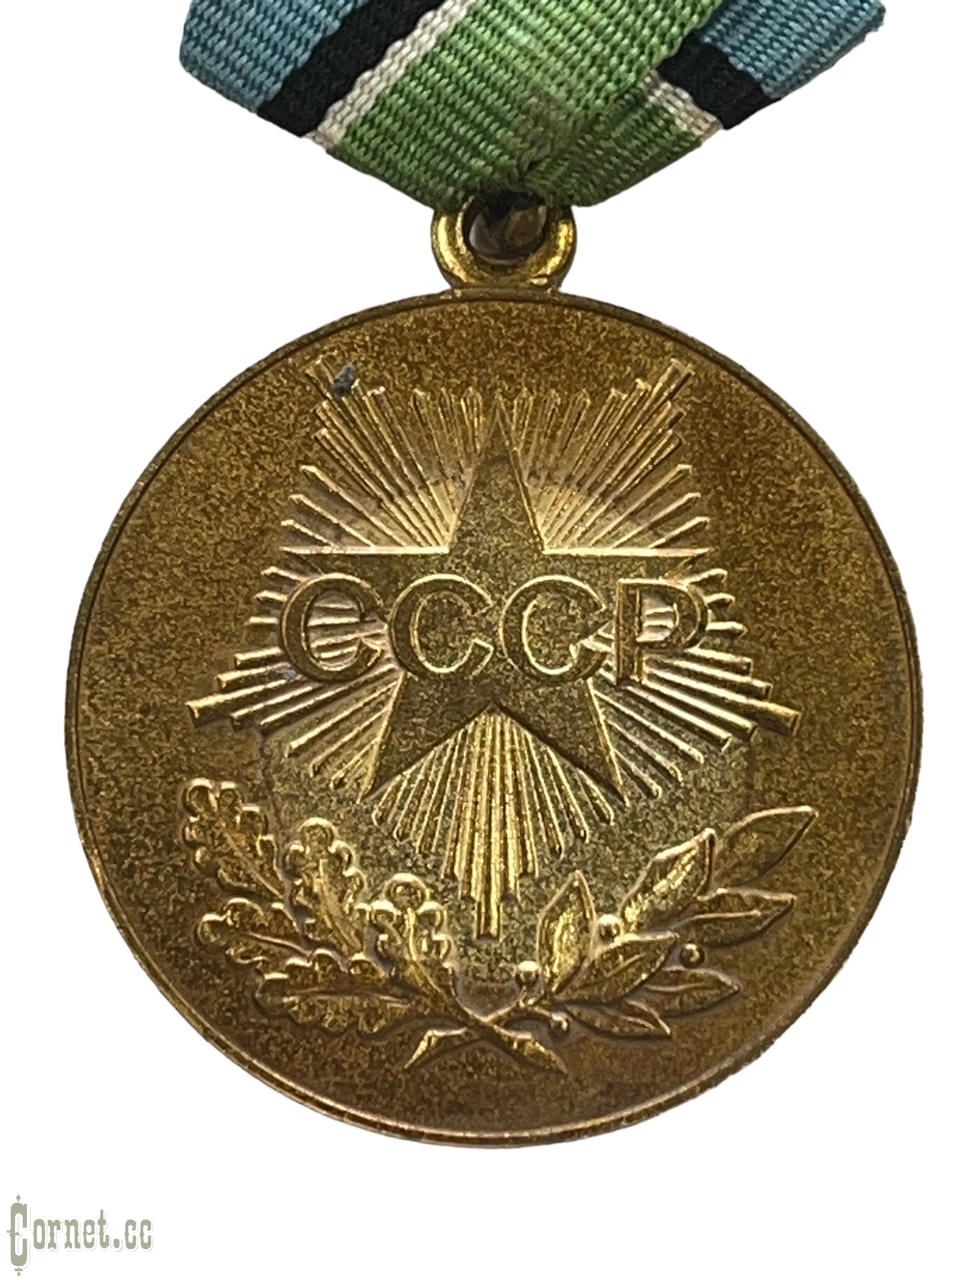 Medal "For the development of mineral resources and the development of the oil and gas complex of Western Siberia".